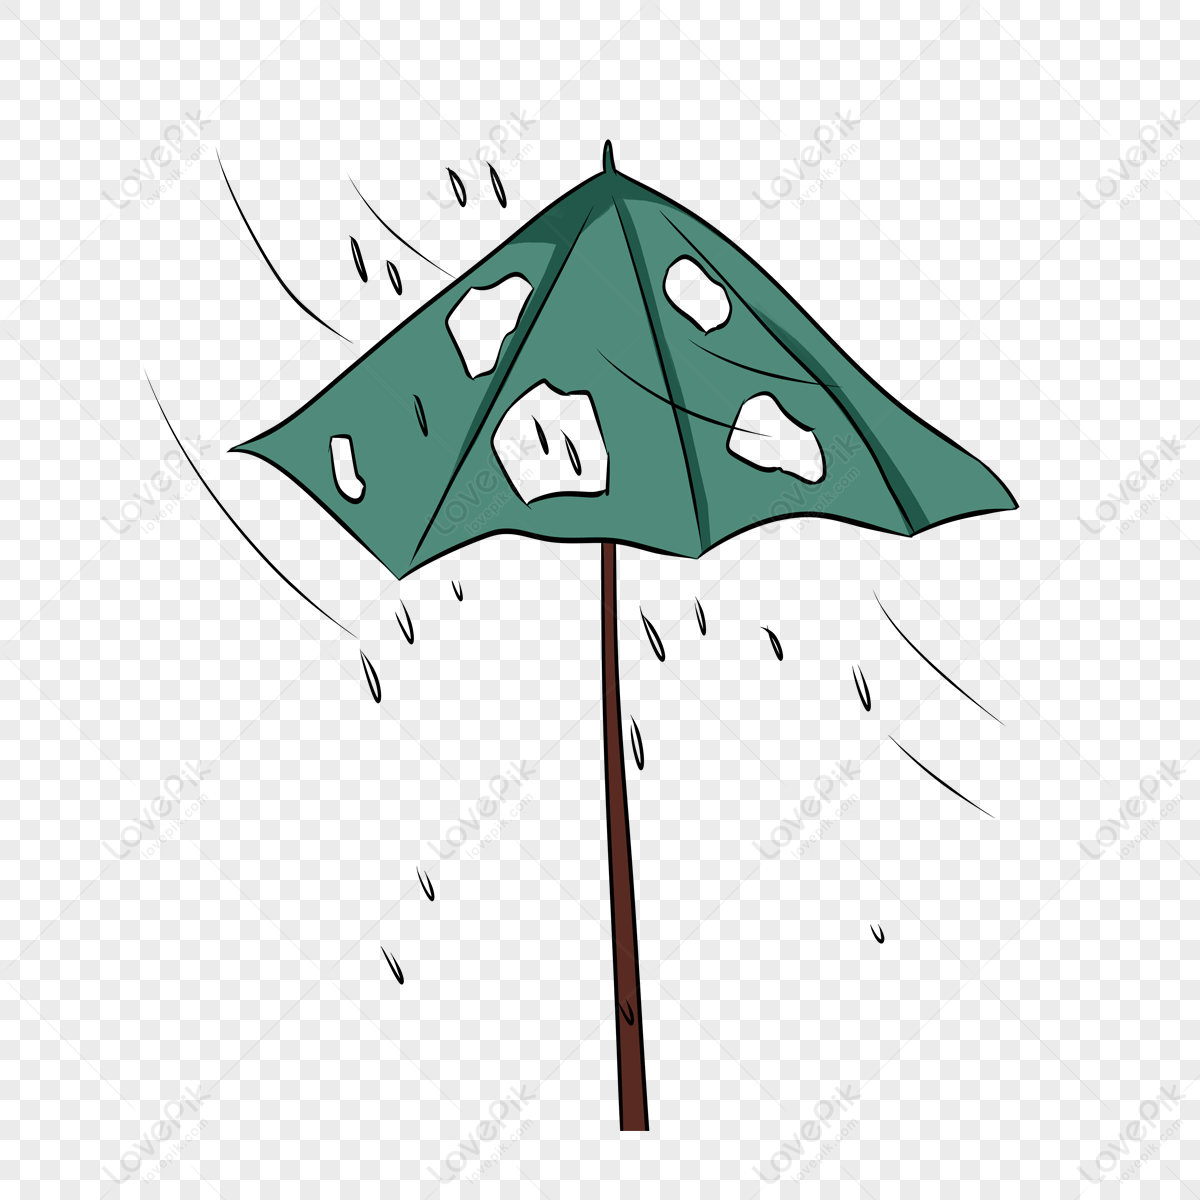 Hand Painted Broken Umbrella PNG Transparent And Clipart Image For Free  Download - Lovepik | 400495086